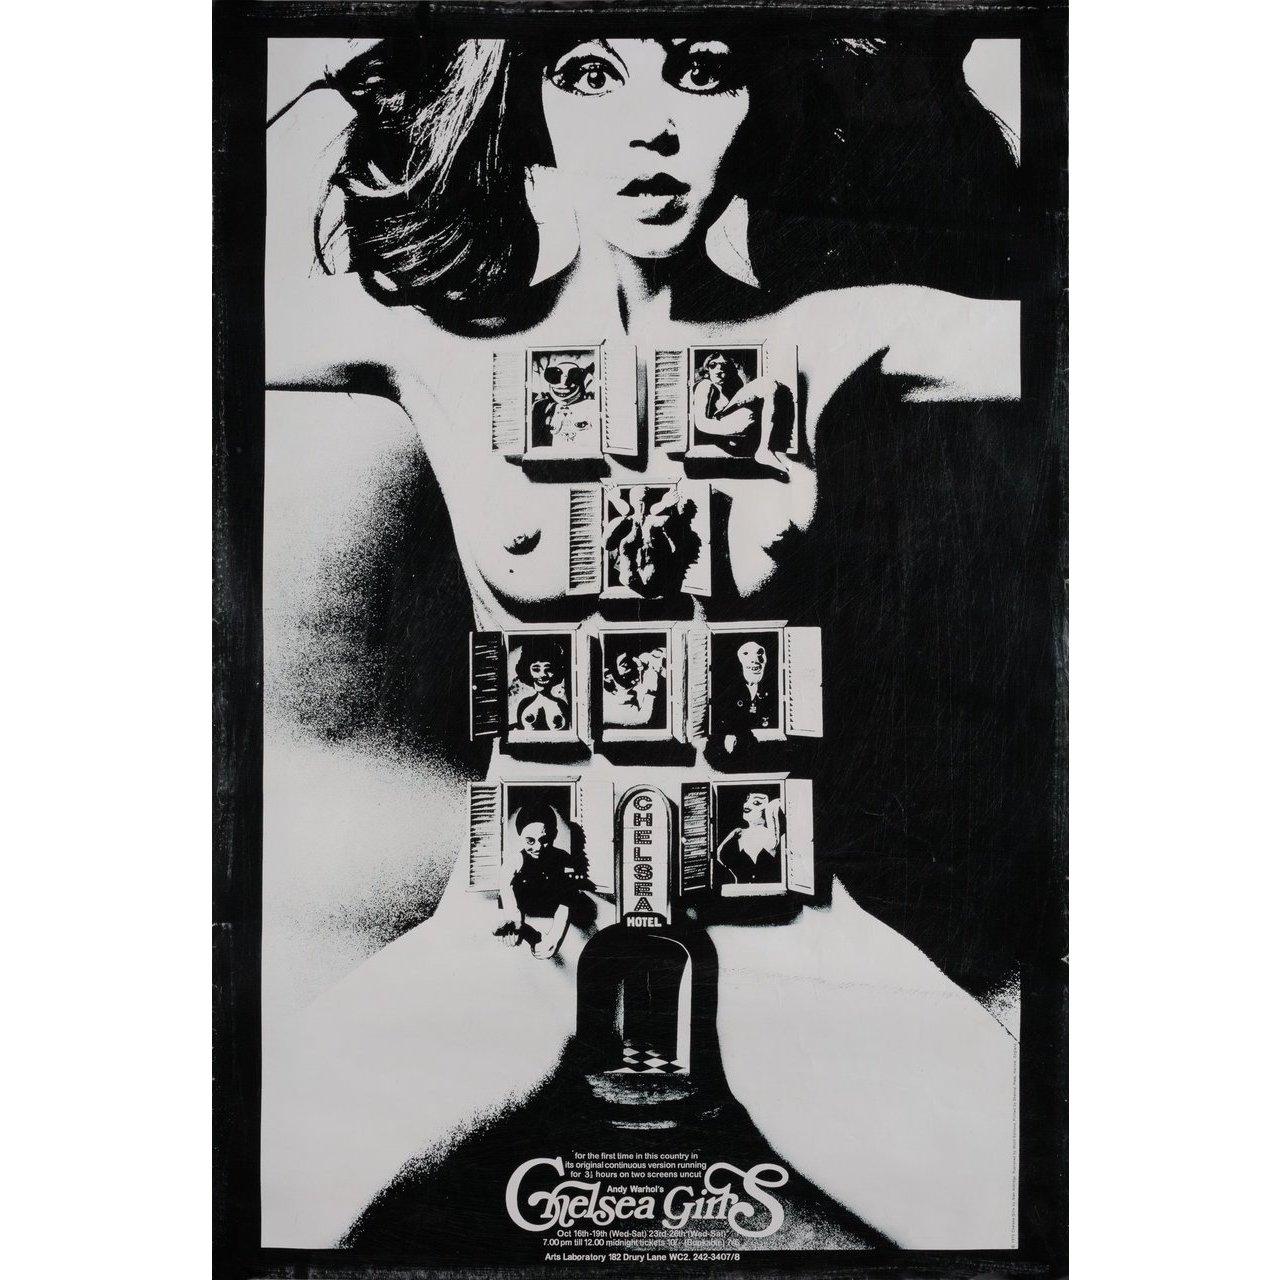 Original 1970 re-release British double crown poster by Alan Aldridge for the 1966 film Chelsea Girls directed by Paul Morrissey / Andy Warhol with Brigid Berlin / Randy Borscheidt / Ari Boulogne / Angelina 'Pepper' Davis. Very Good-Fine condition,